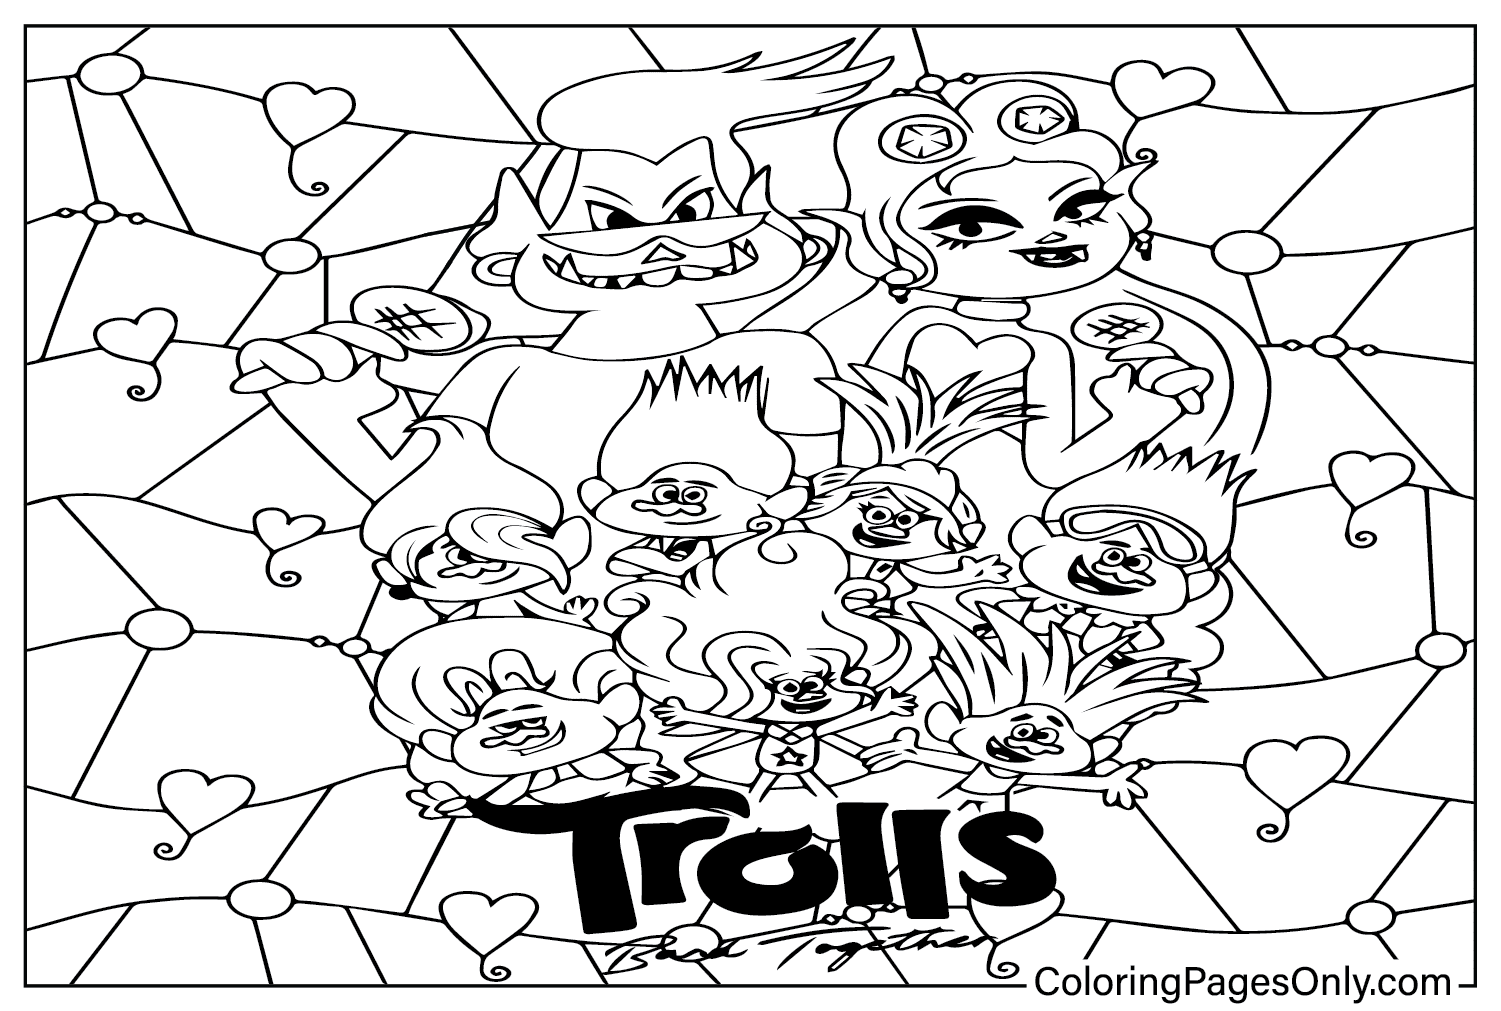 Trolls Band Together Color Page - Free Printable Coloring Pages